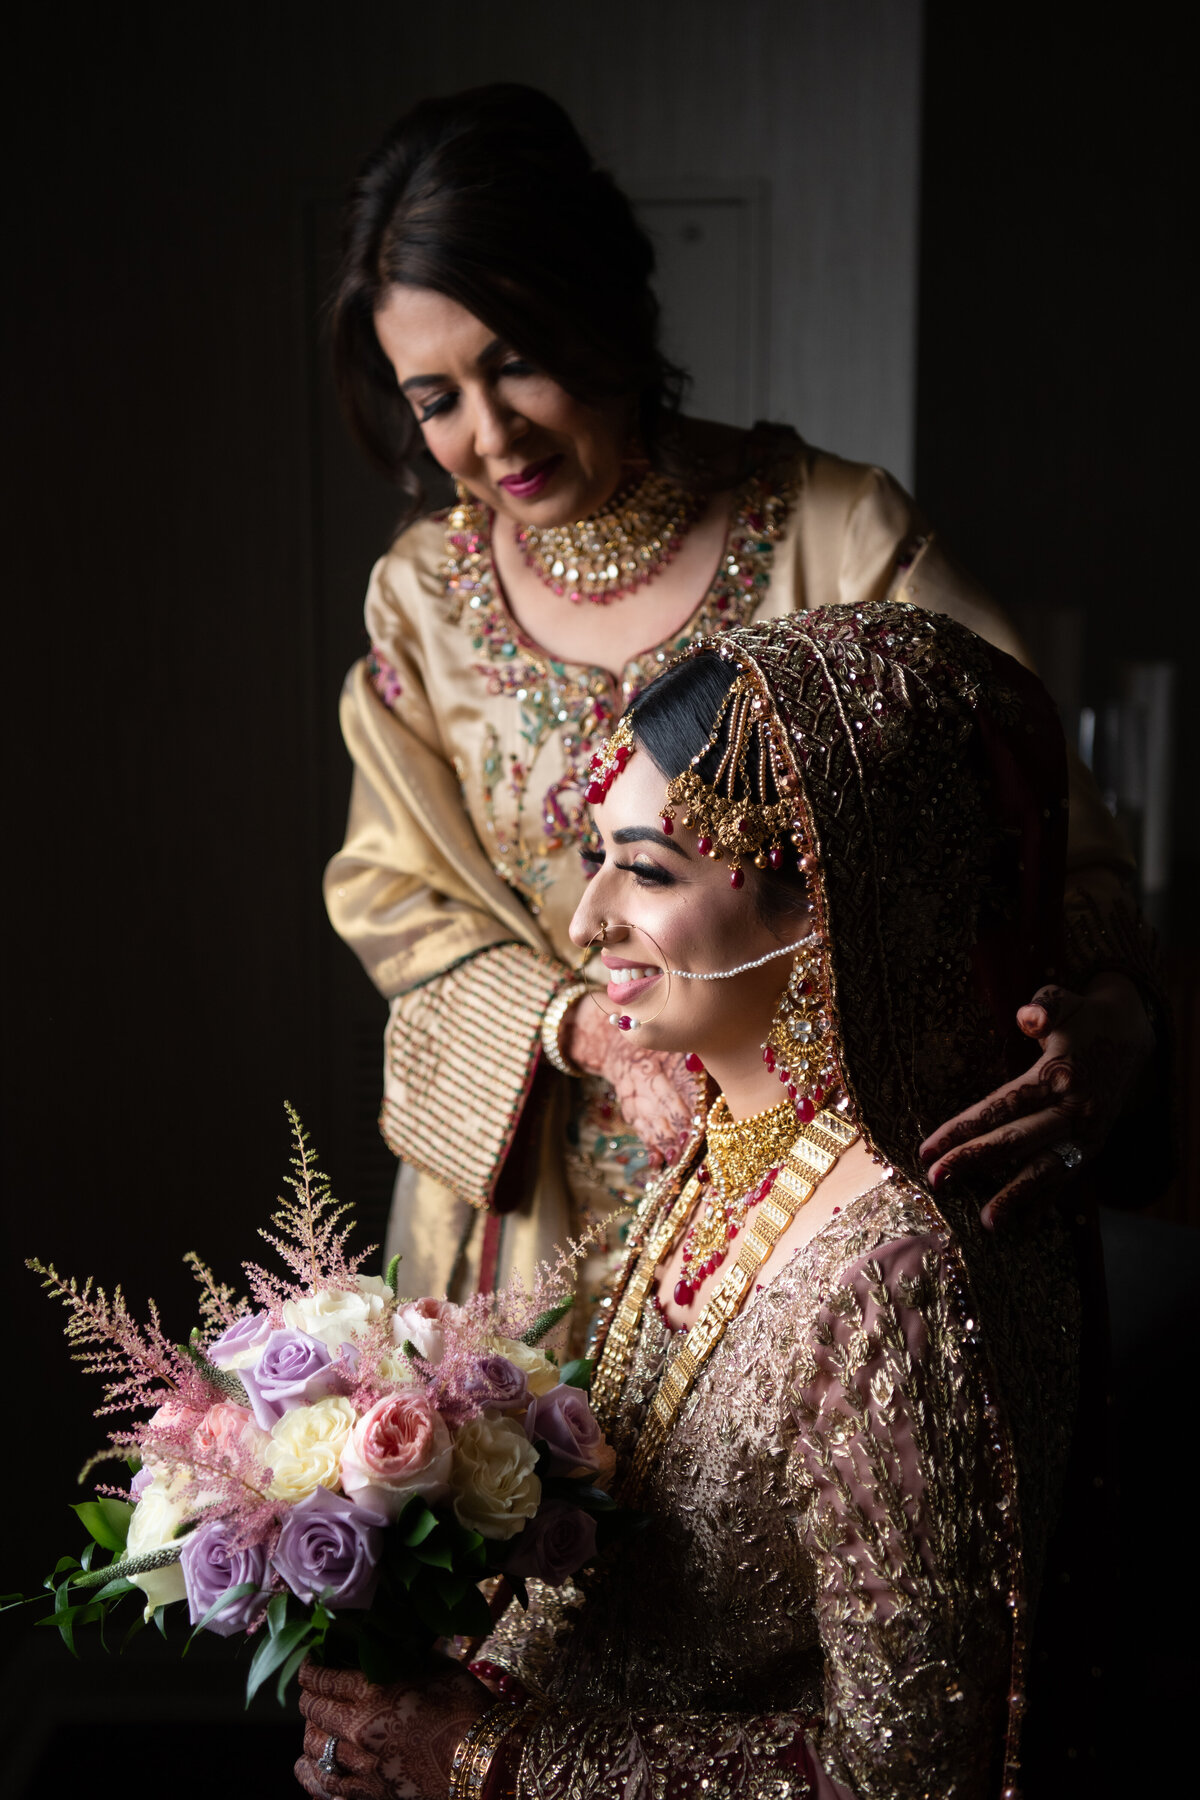 maha_studios_wedding_photography_chicago_new_york_california_sophisticated_and_vibrant_photography_honoring_modern_south_asian_and_multicultural_weddings8